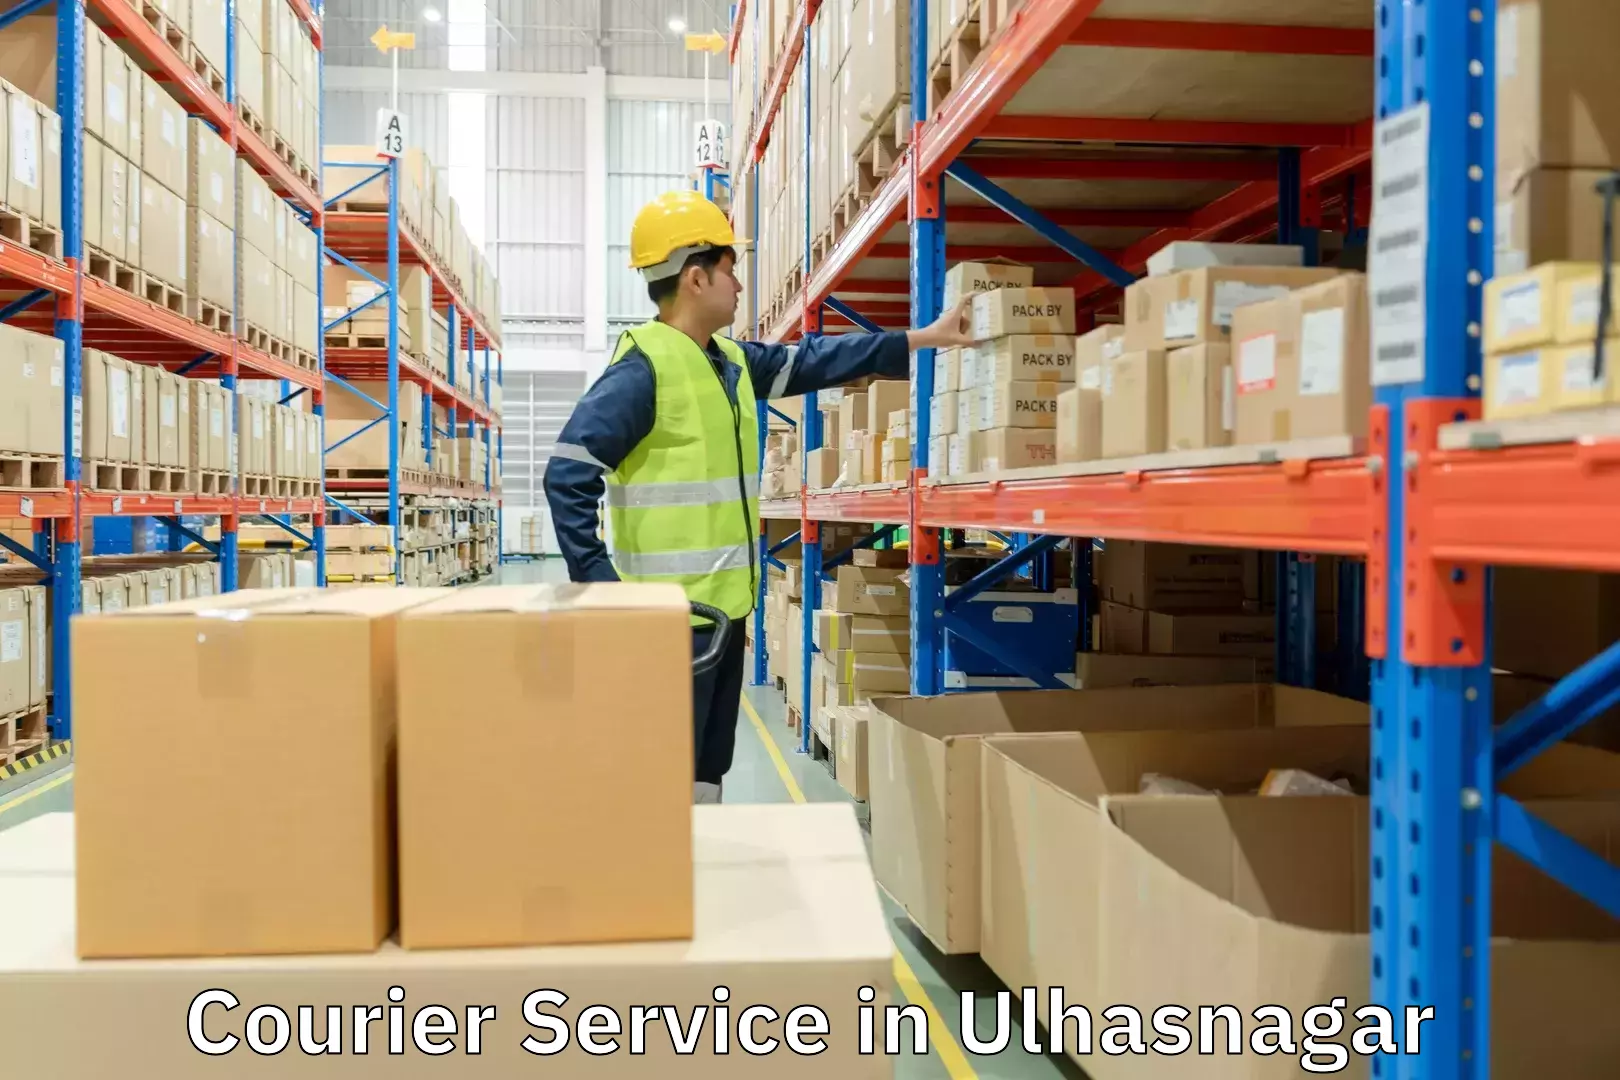 Express delivery solutions in Ulhasnagar